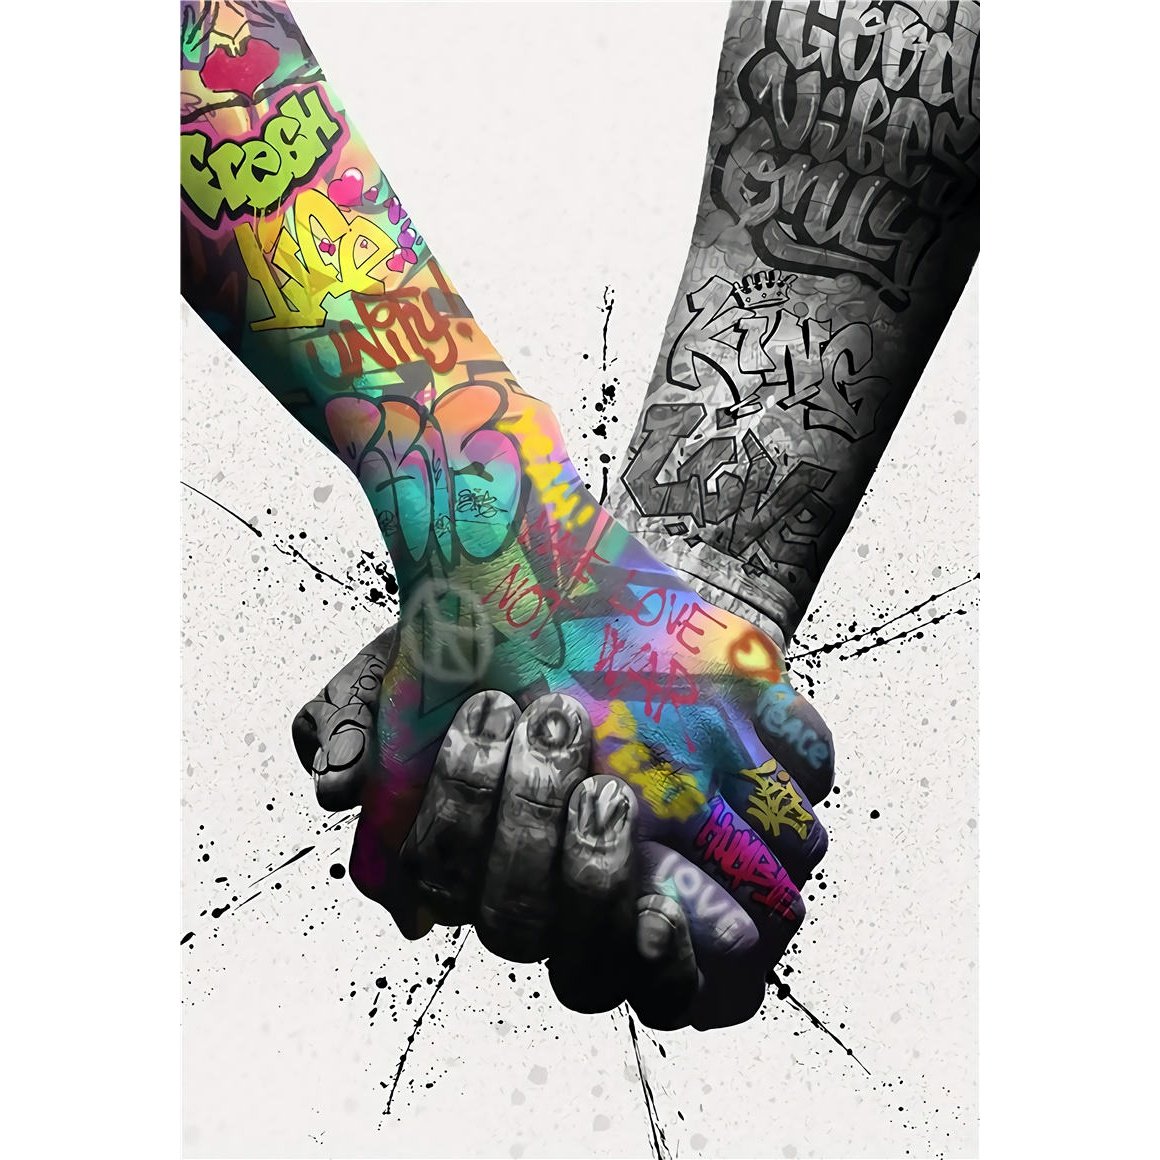 Let's Go Hand in Hand Graffiti - Playful and Inspirational